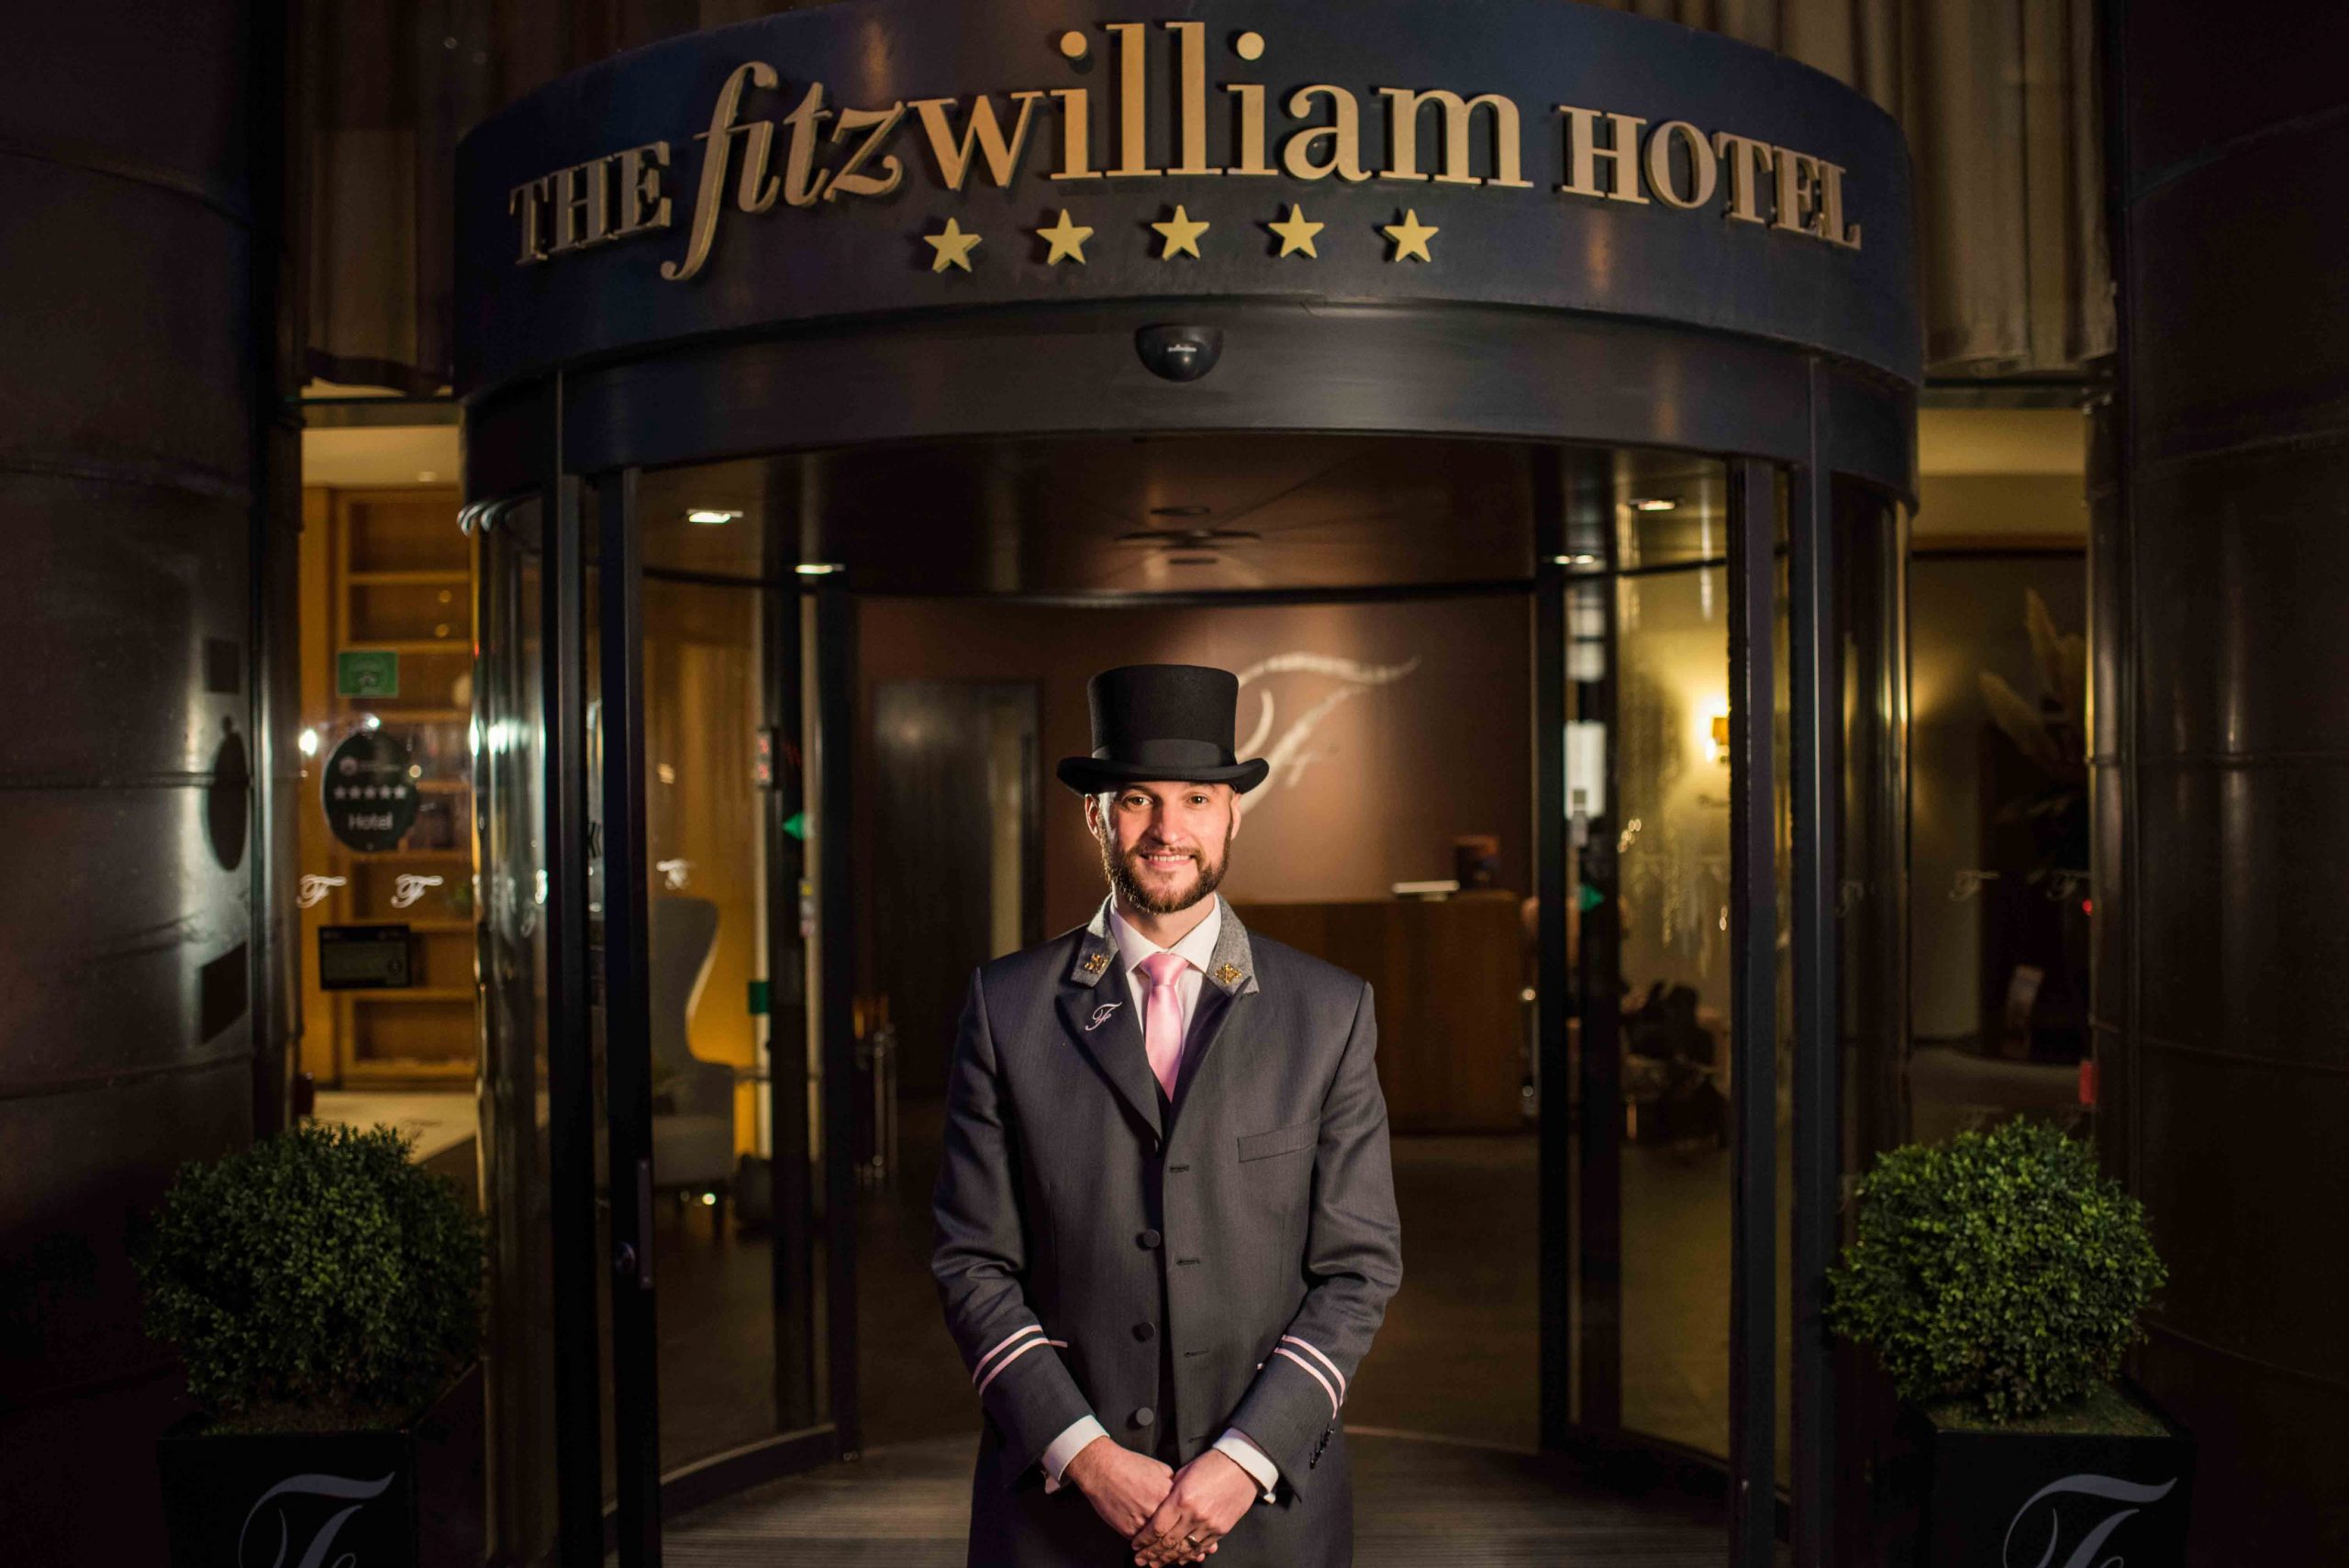 Fitzwilliam manager buoyed by record ROI visitors